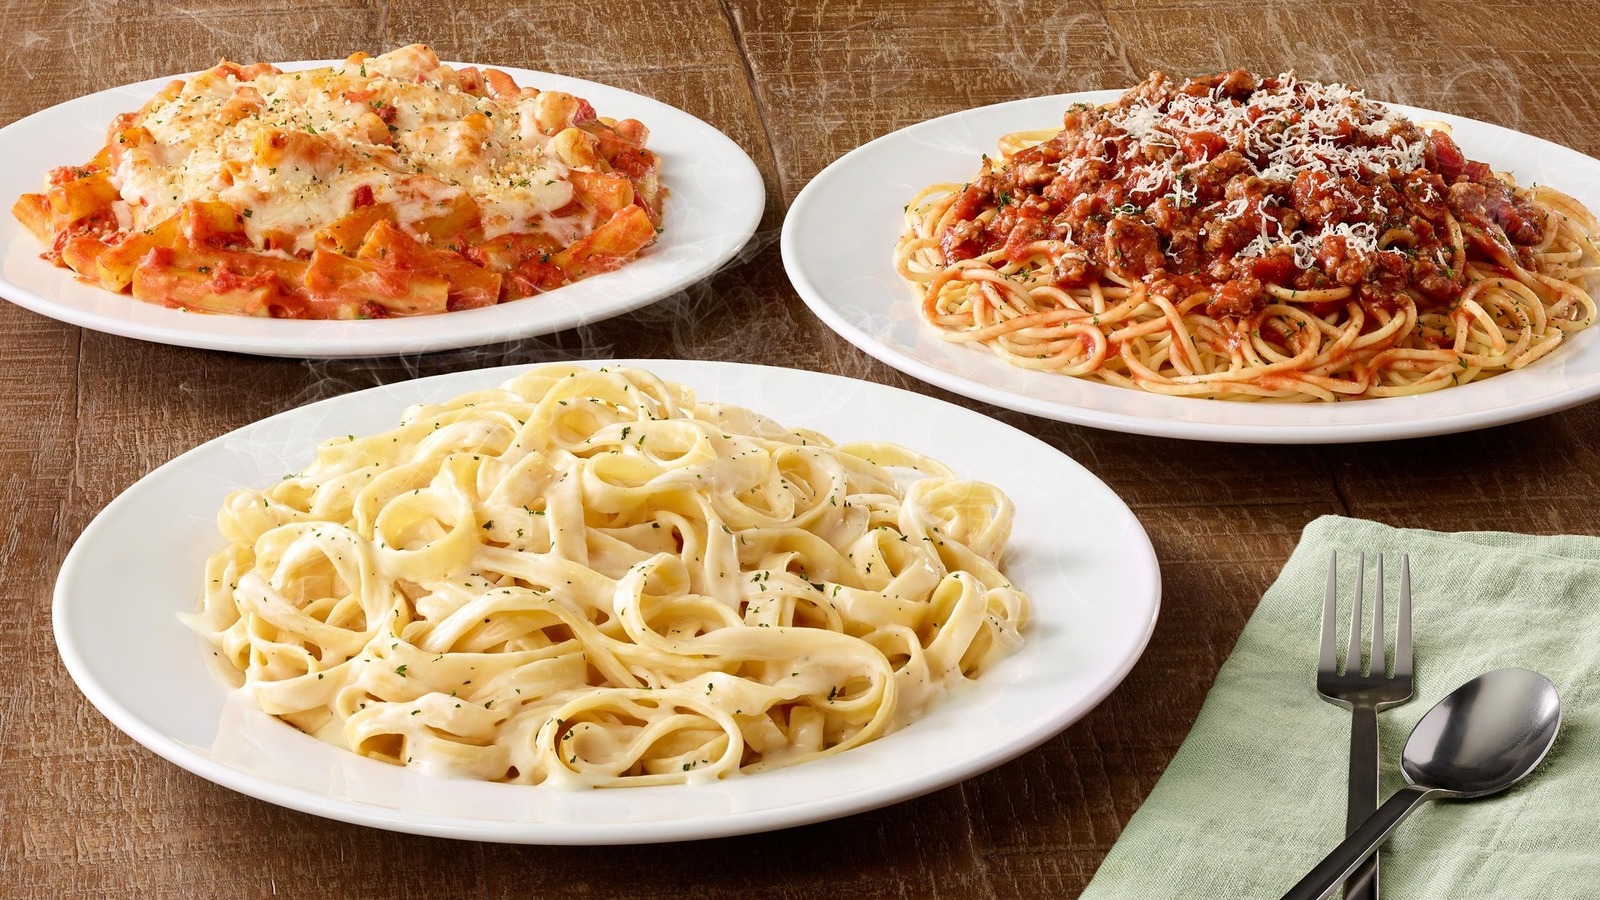 Are Olive Garden's NeverEnding Pasta Bowls Available At All Locations?